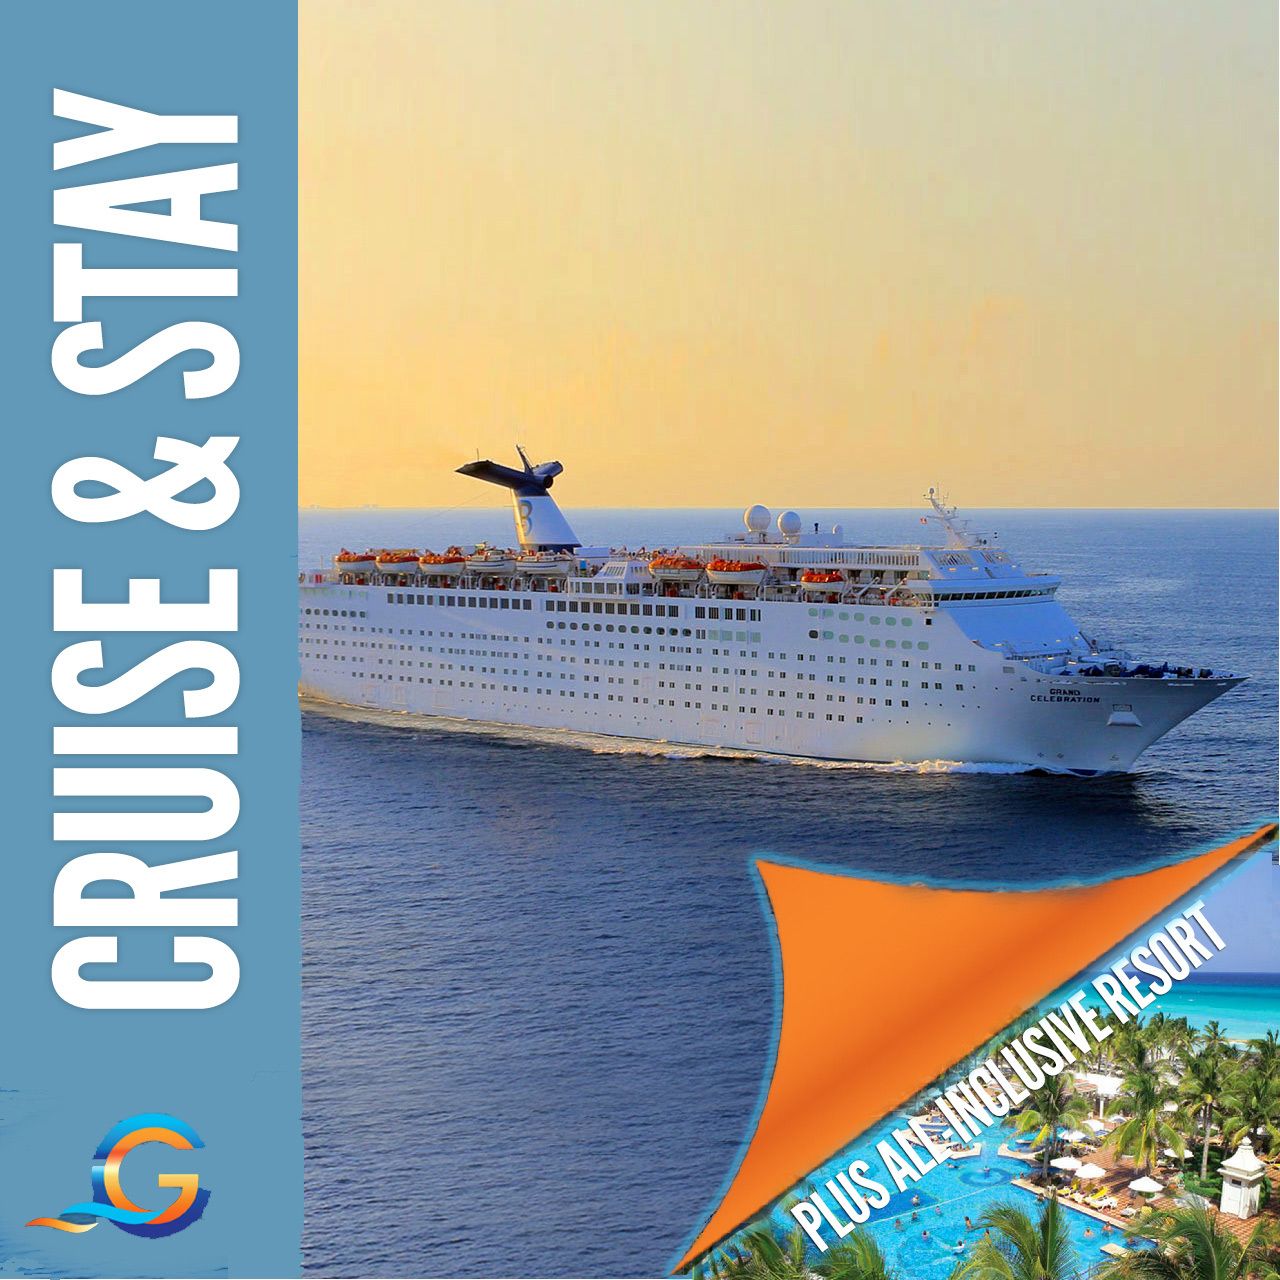 Boat Yacht Rental: All Inclusive Cruise Packages For 4